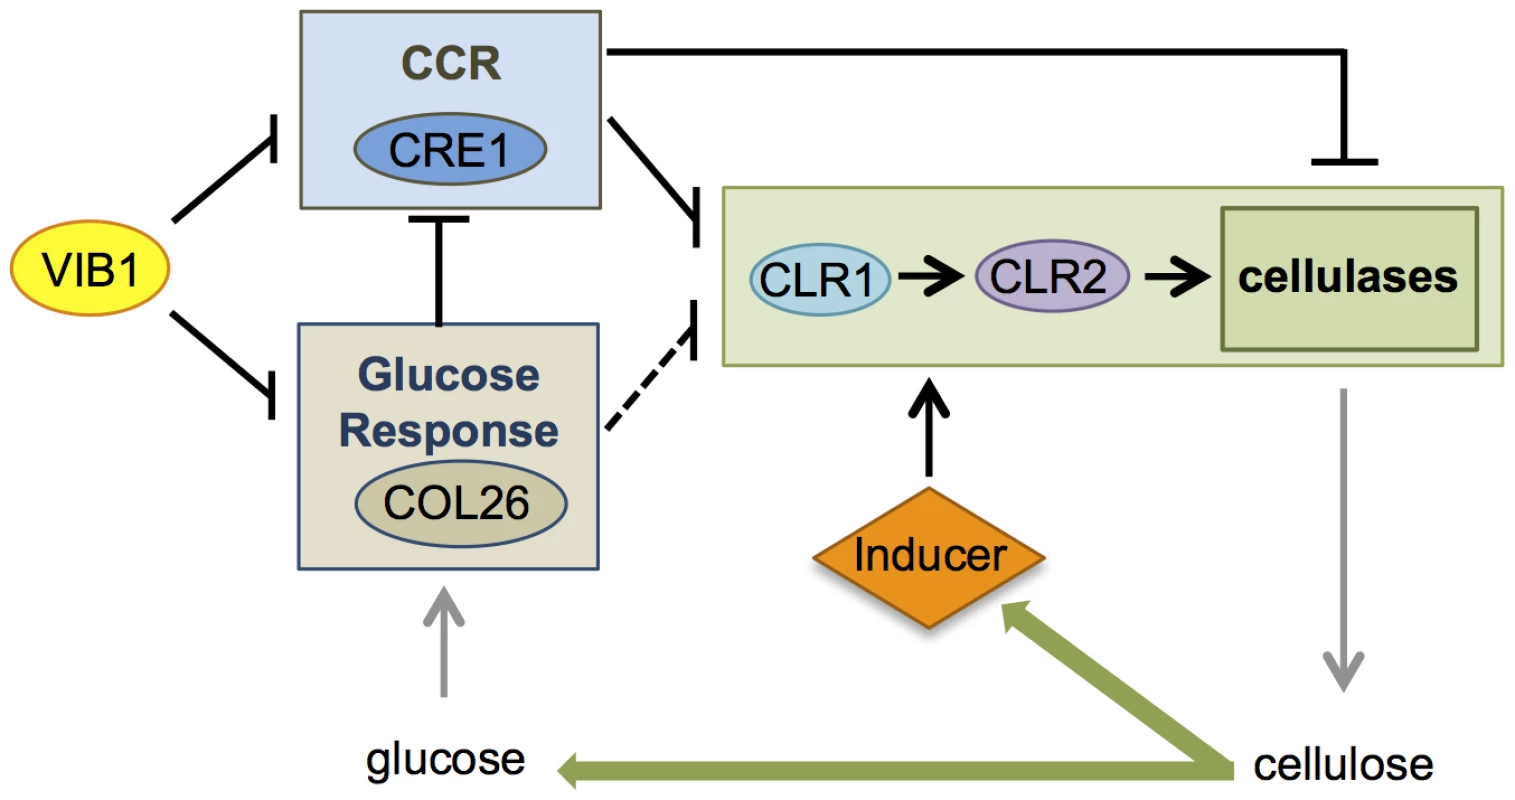 Model for role of VIB1 in regulating glucose sensing/metabolism and CCR under cellulolytic conditions.